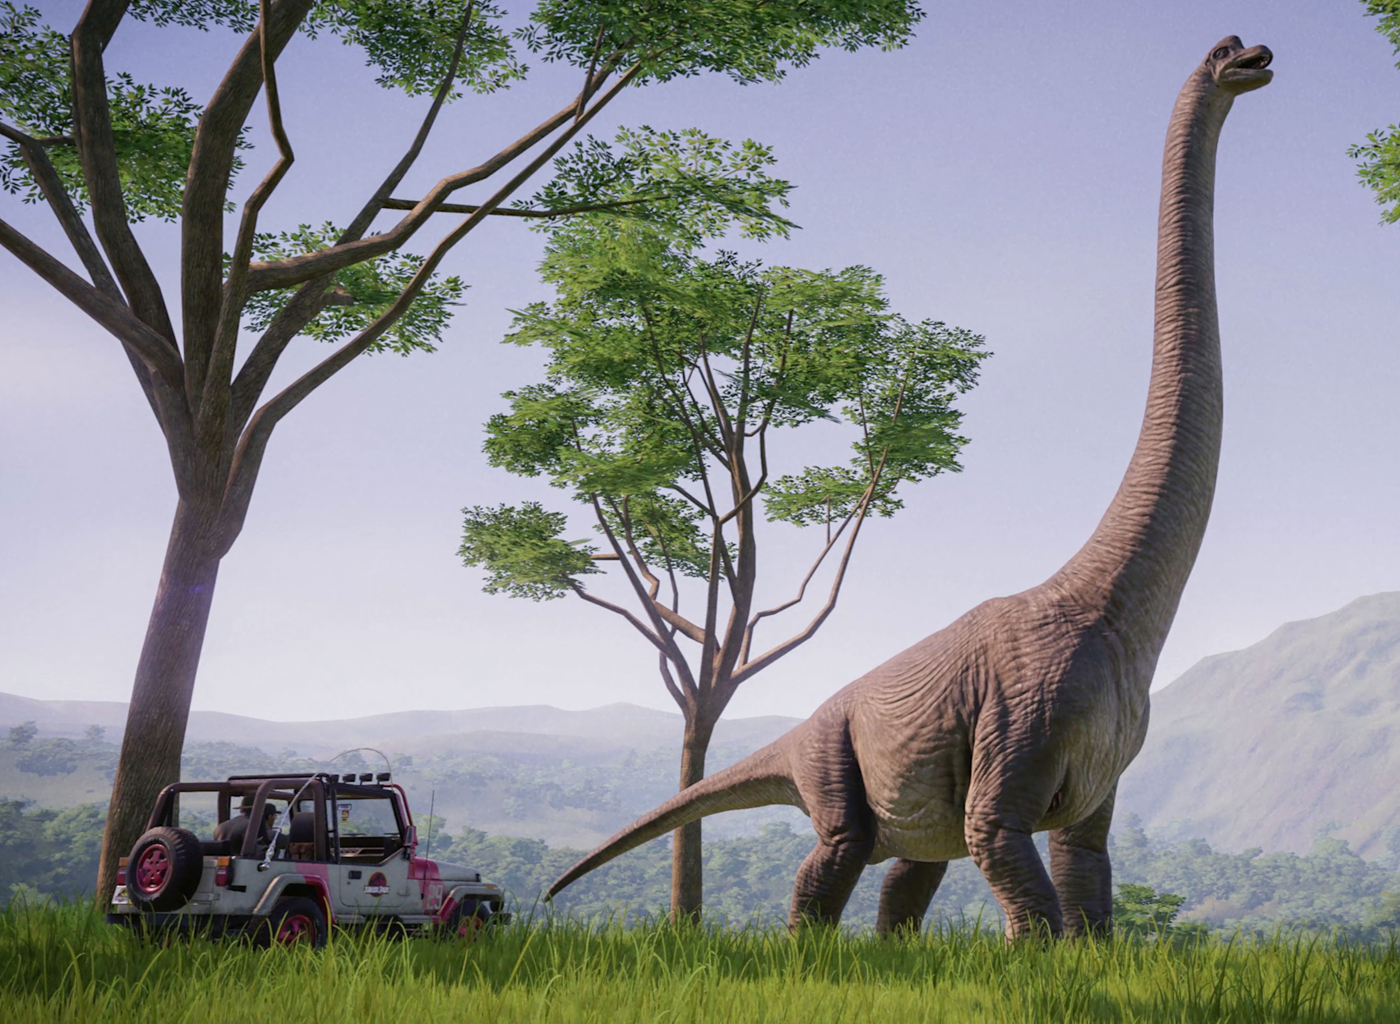 Upcoming Jurassic World: Evolution DLC Takes Players Back To Where It All Began